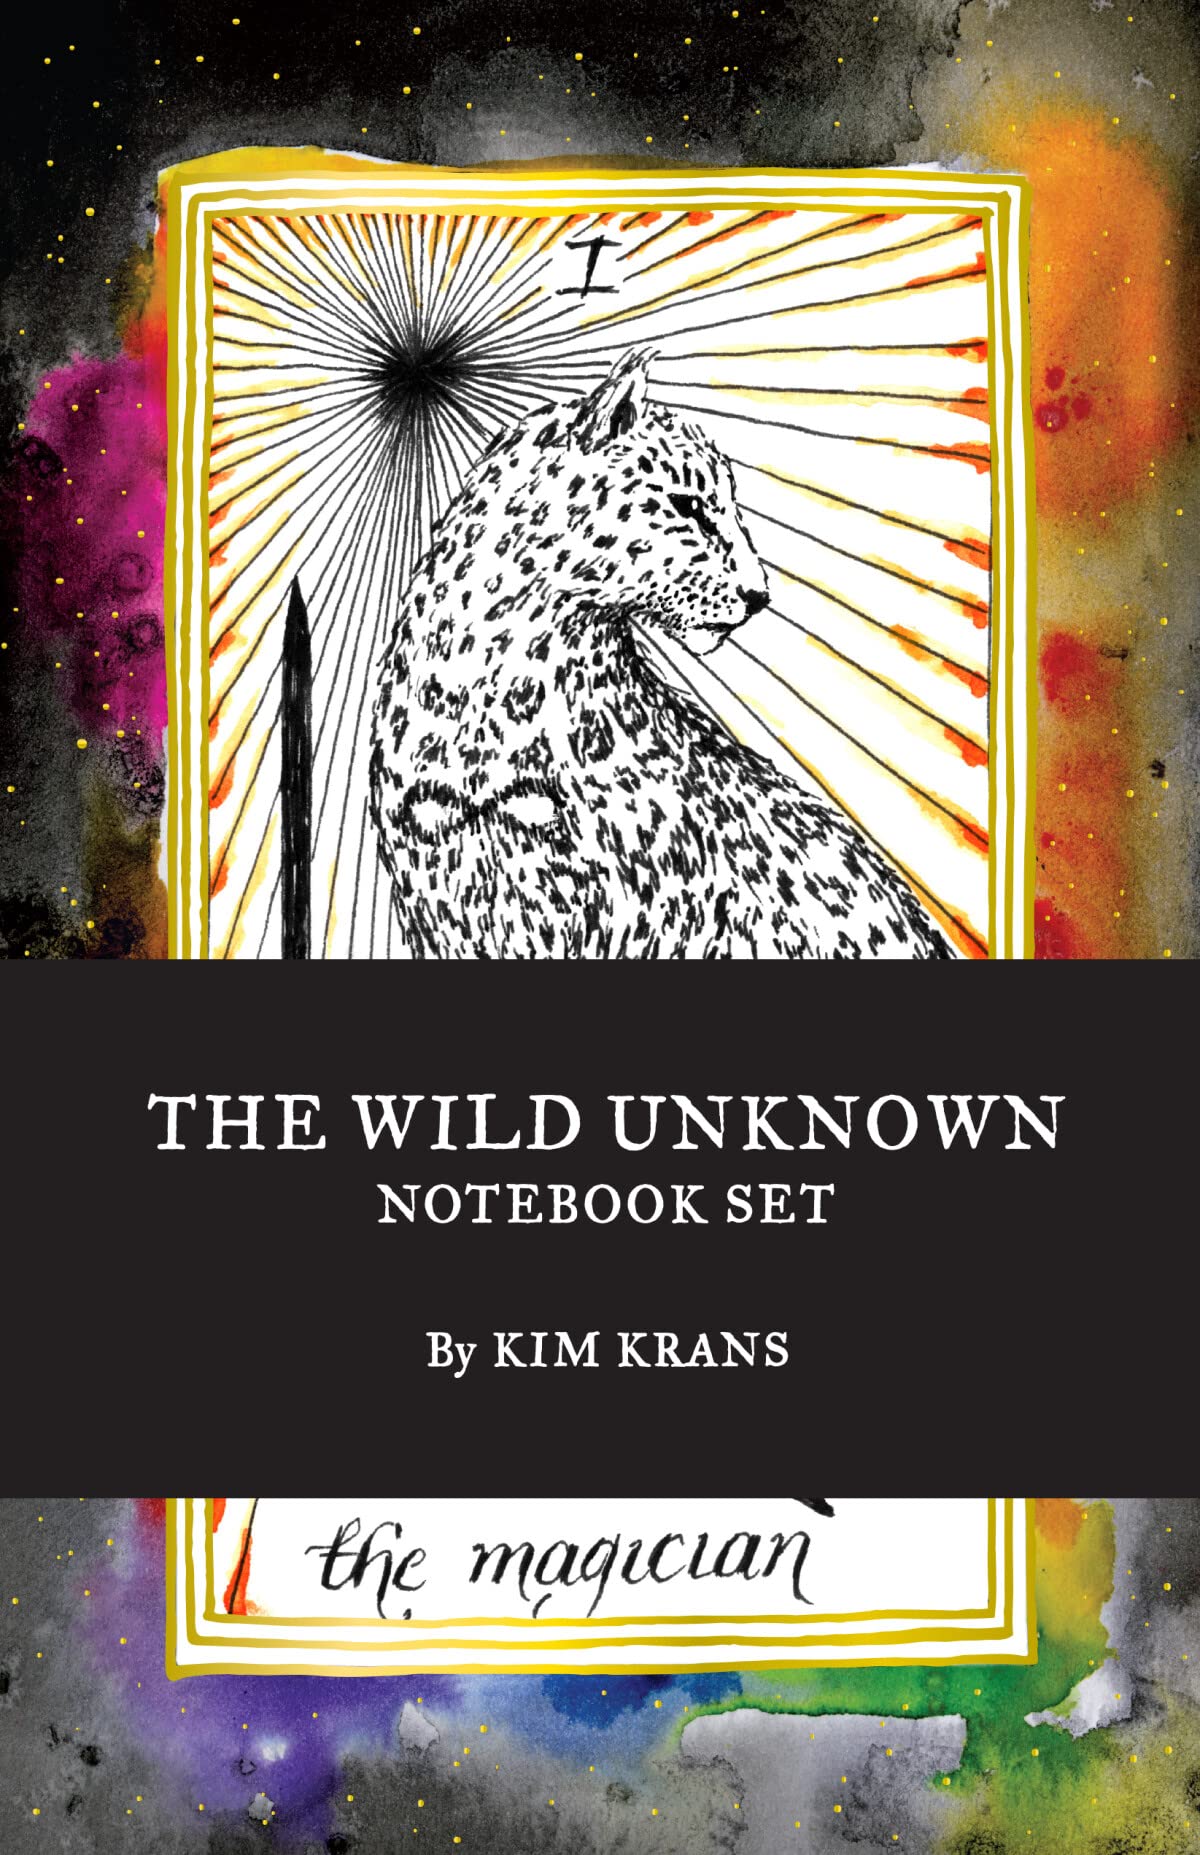 The Wild Unknown Notebook Set by Kim Krans Paperback